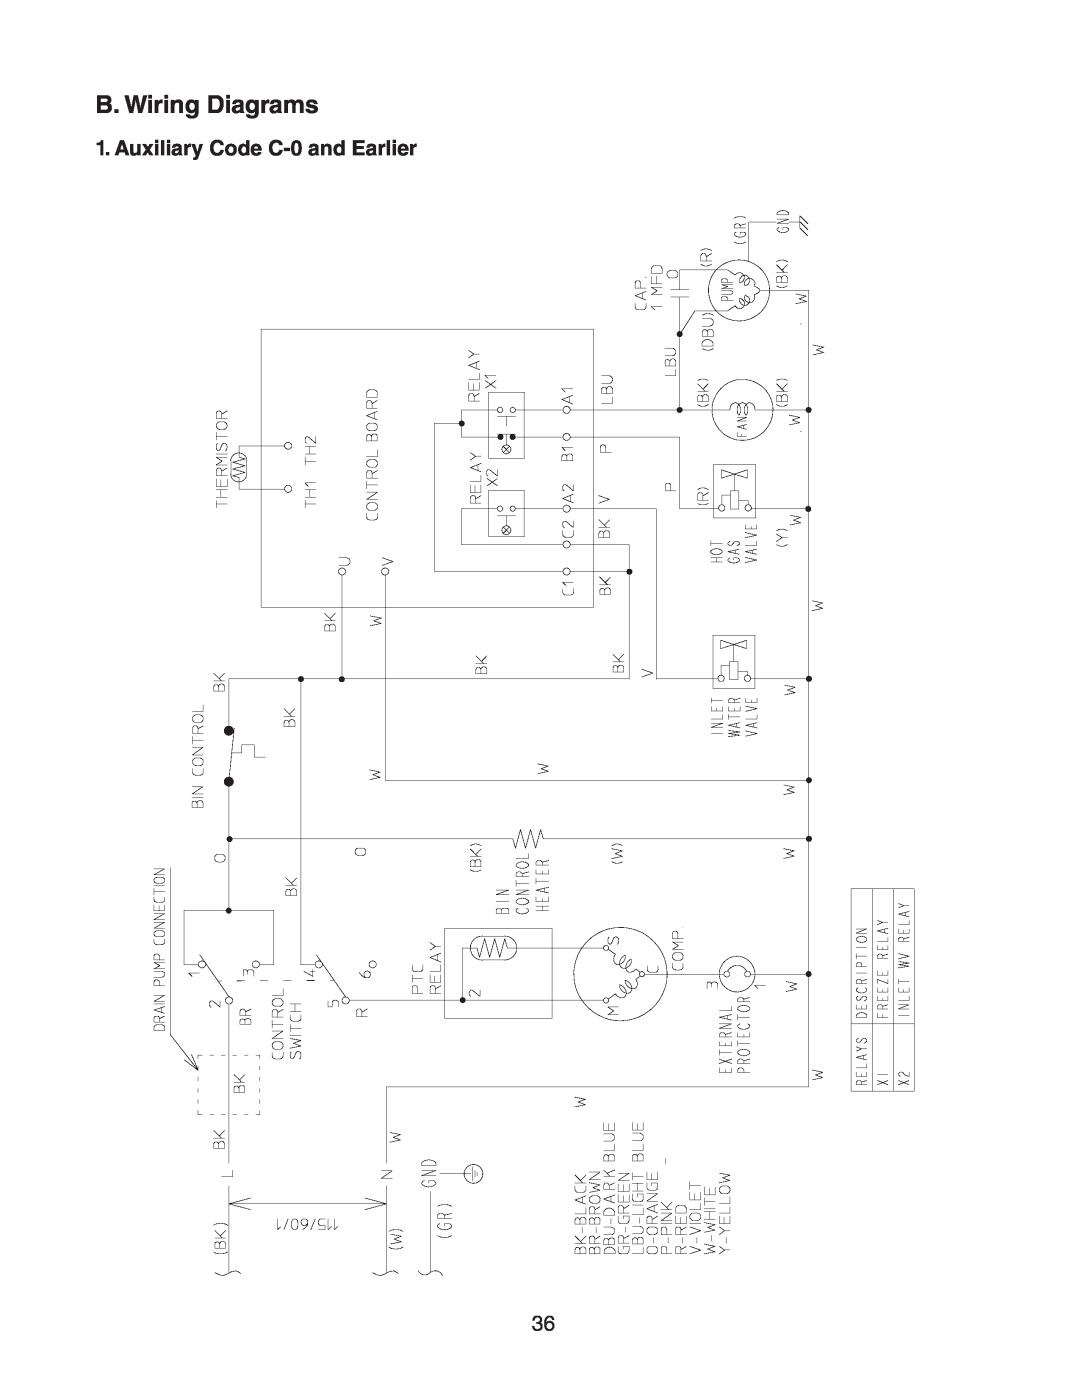 Hoshizaki AM-50BAE-ADDS, AM-50BAE-DS service manual B. Wiring Diagrams, Auxiliary Code C-0 and Earlier 